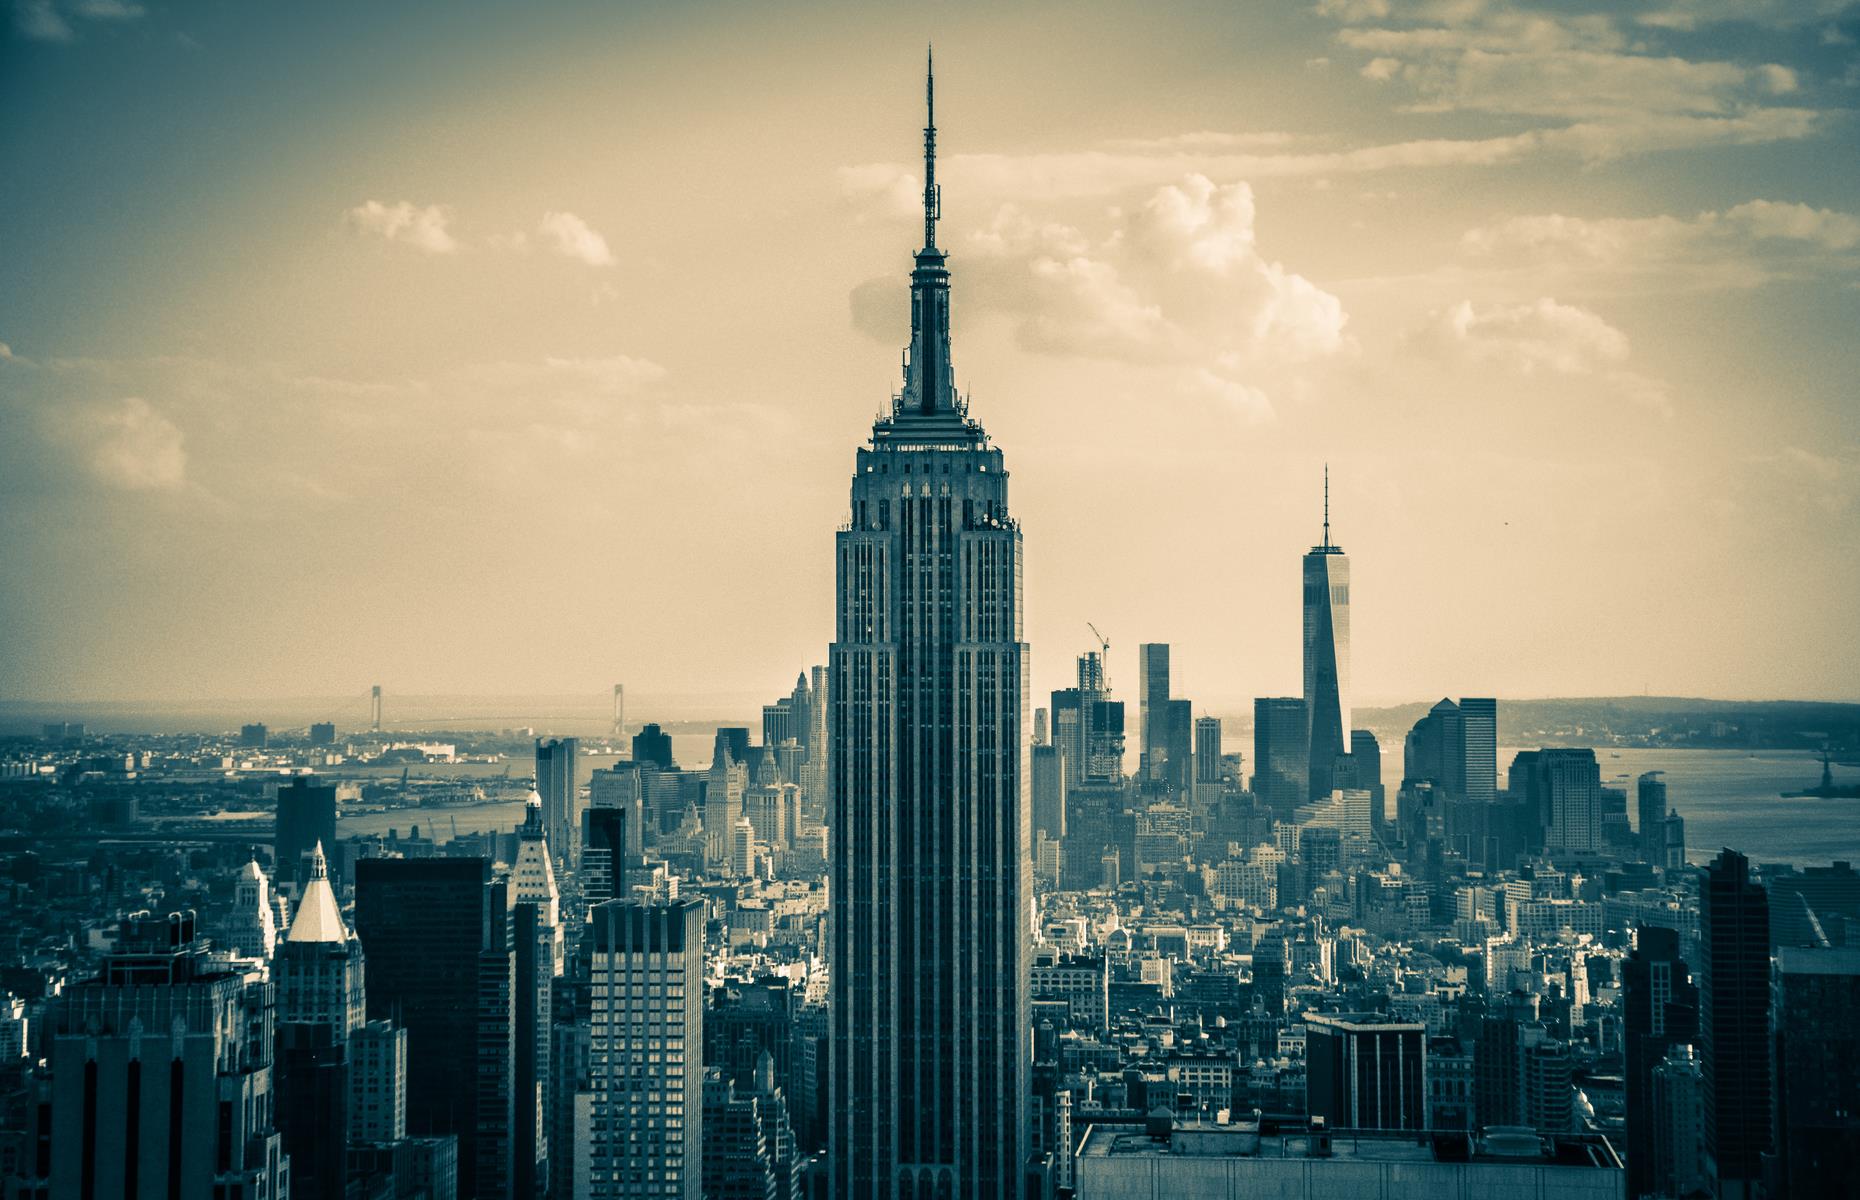 The Empire State Building is amongst its US assets